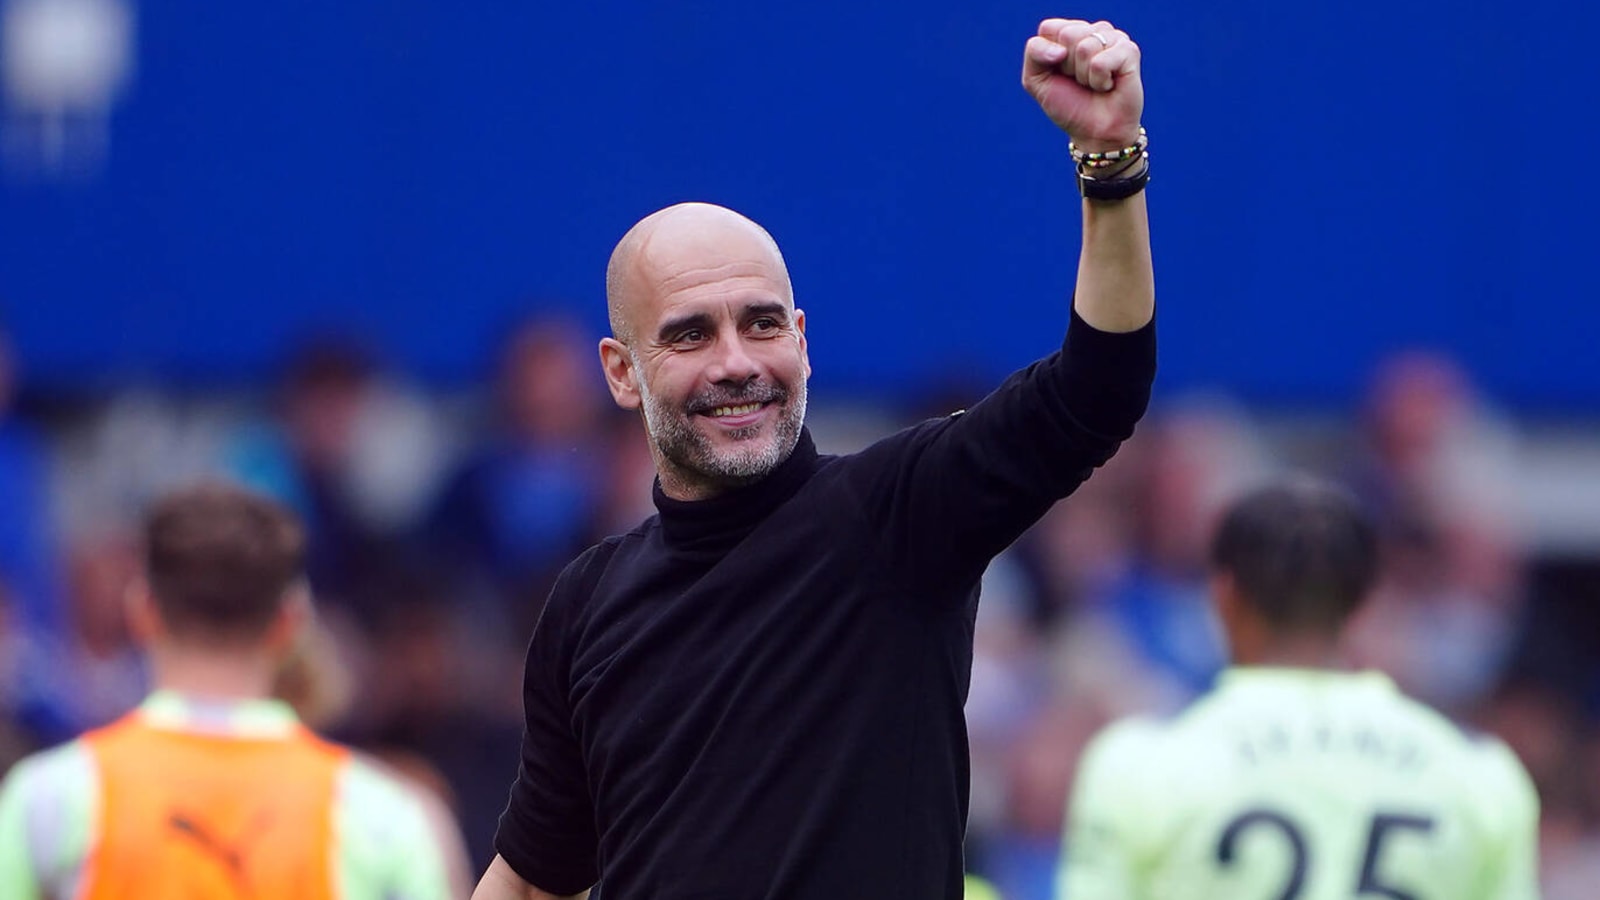 Man City hammer Real Madrid as Guardiola vows not to 'overthink'